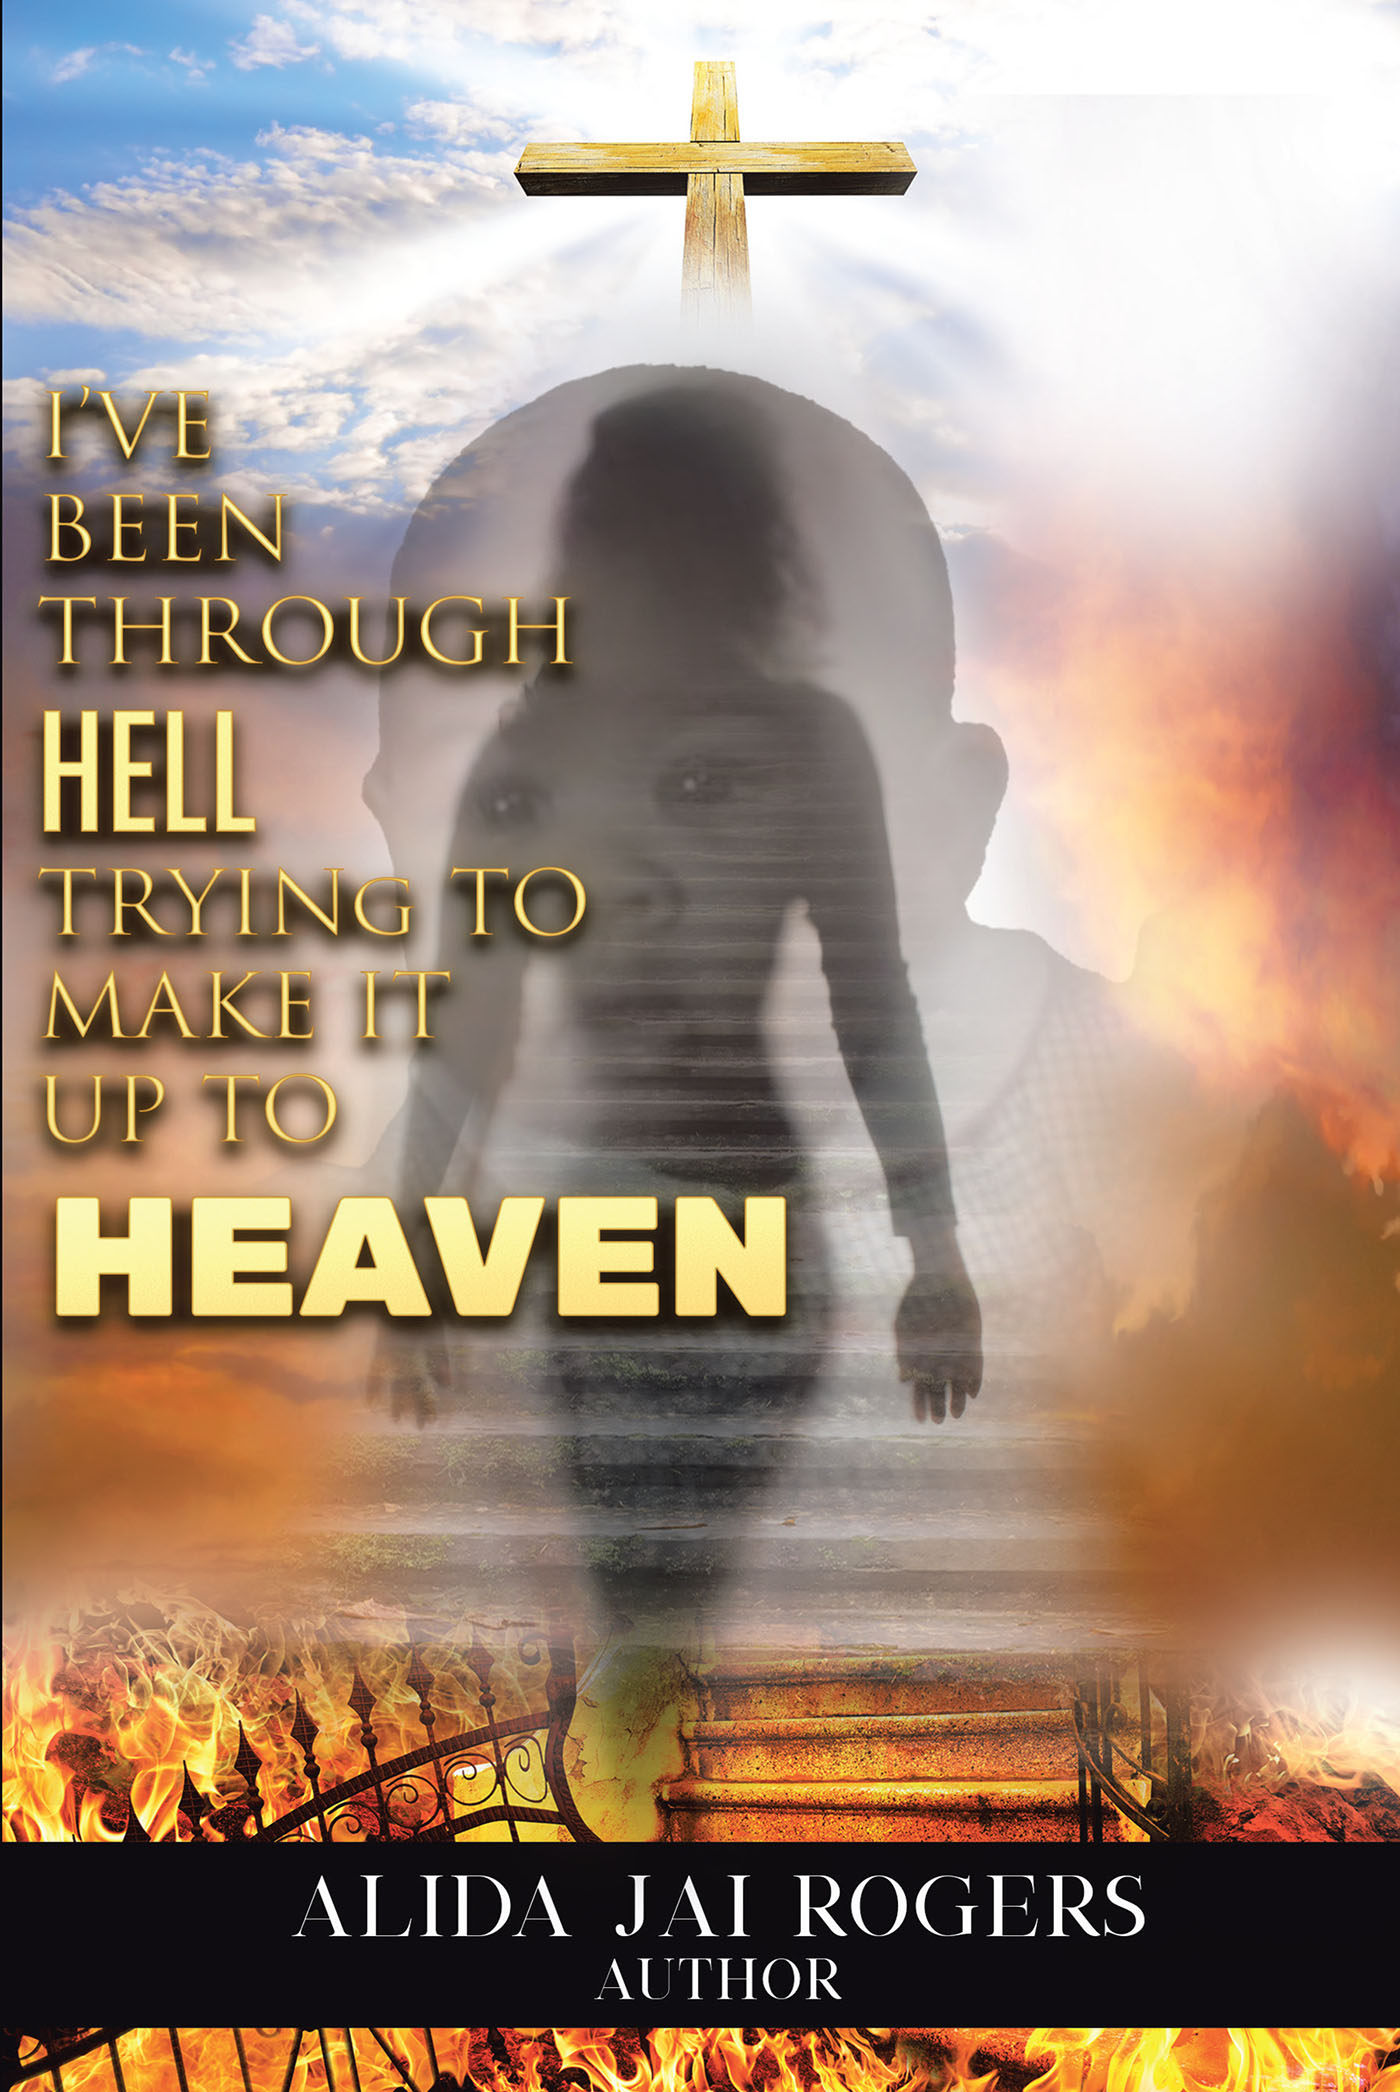 Alida Jai Rogers’s Newly Released “I’ve Been through Hell Trying to Make It Up to Heaven” is a Touching Memoir That Brings Lessons of Faith to Perspective